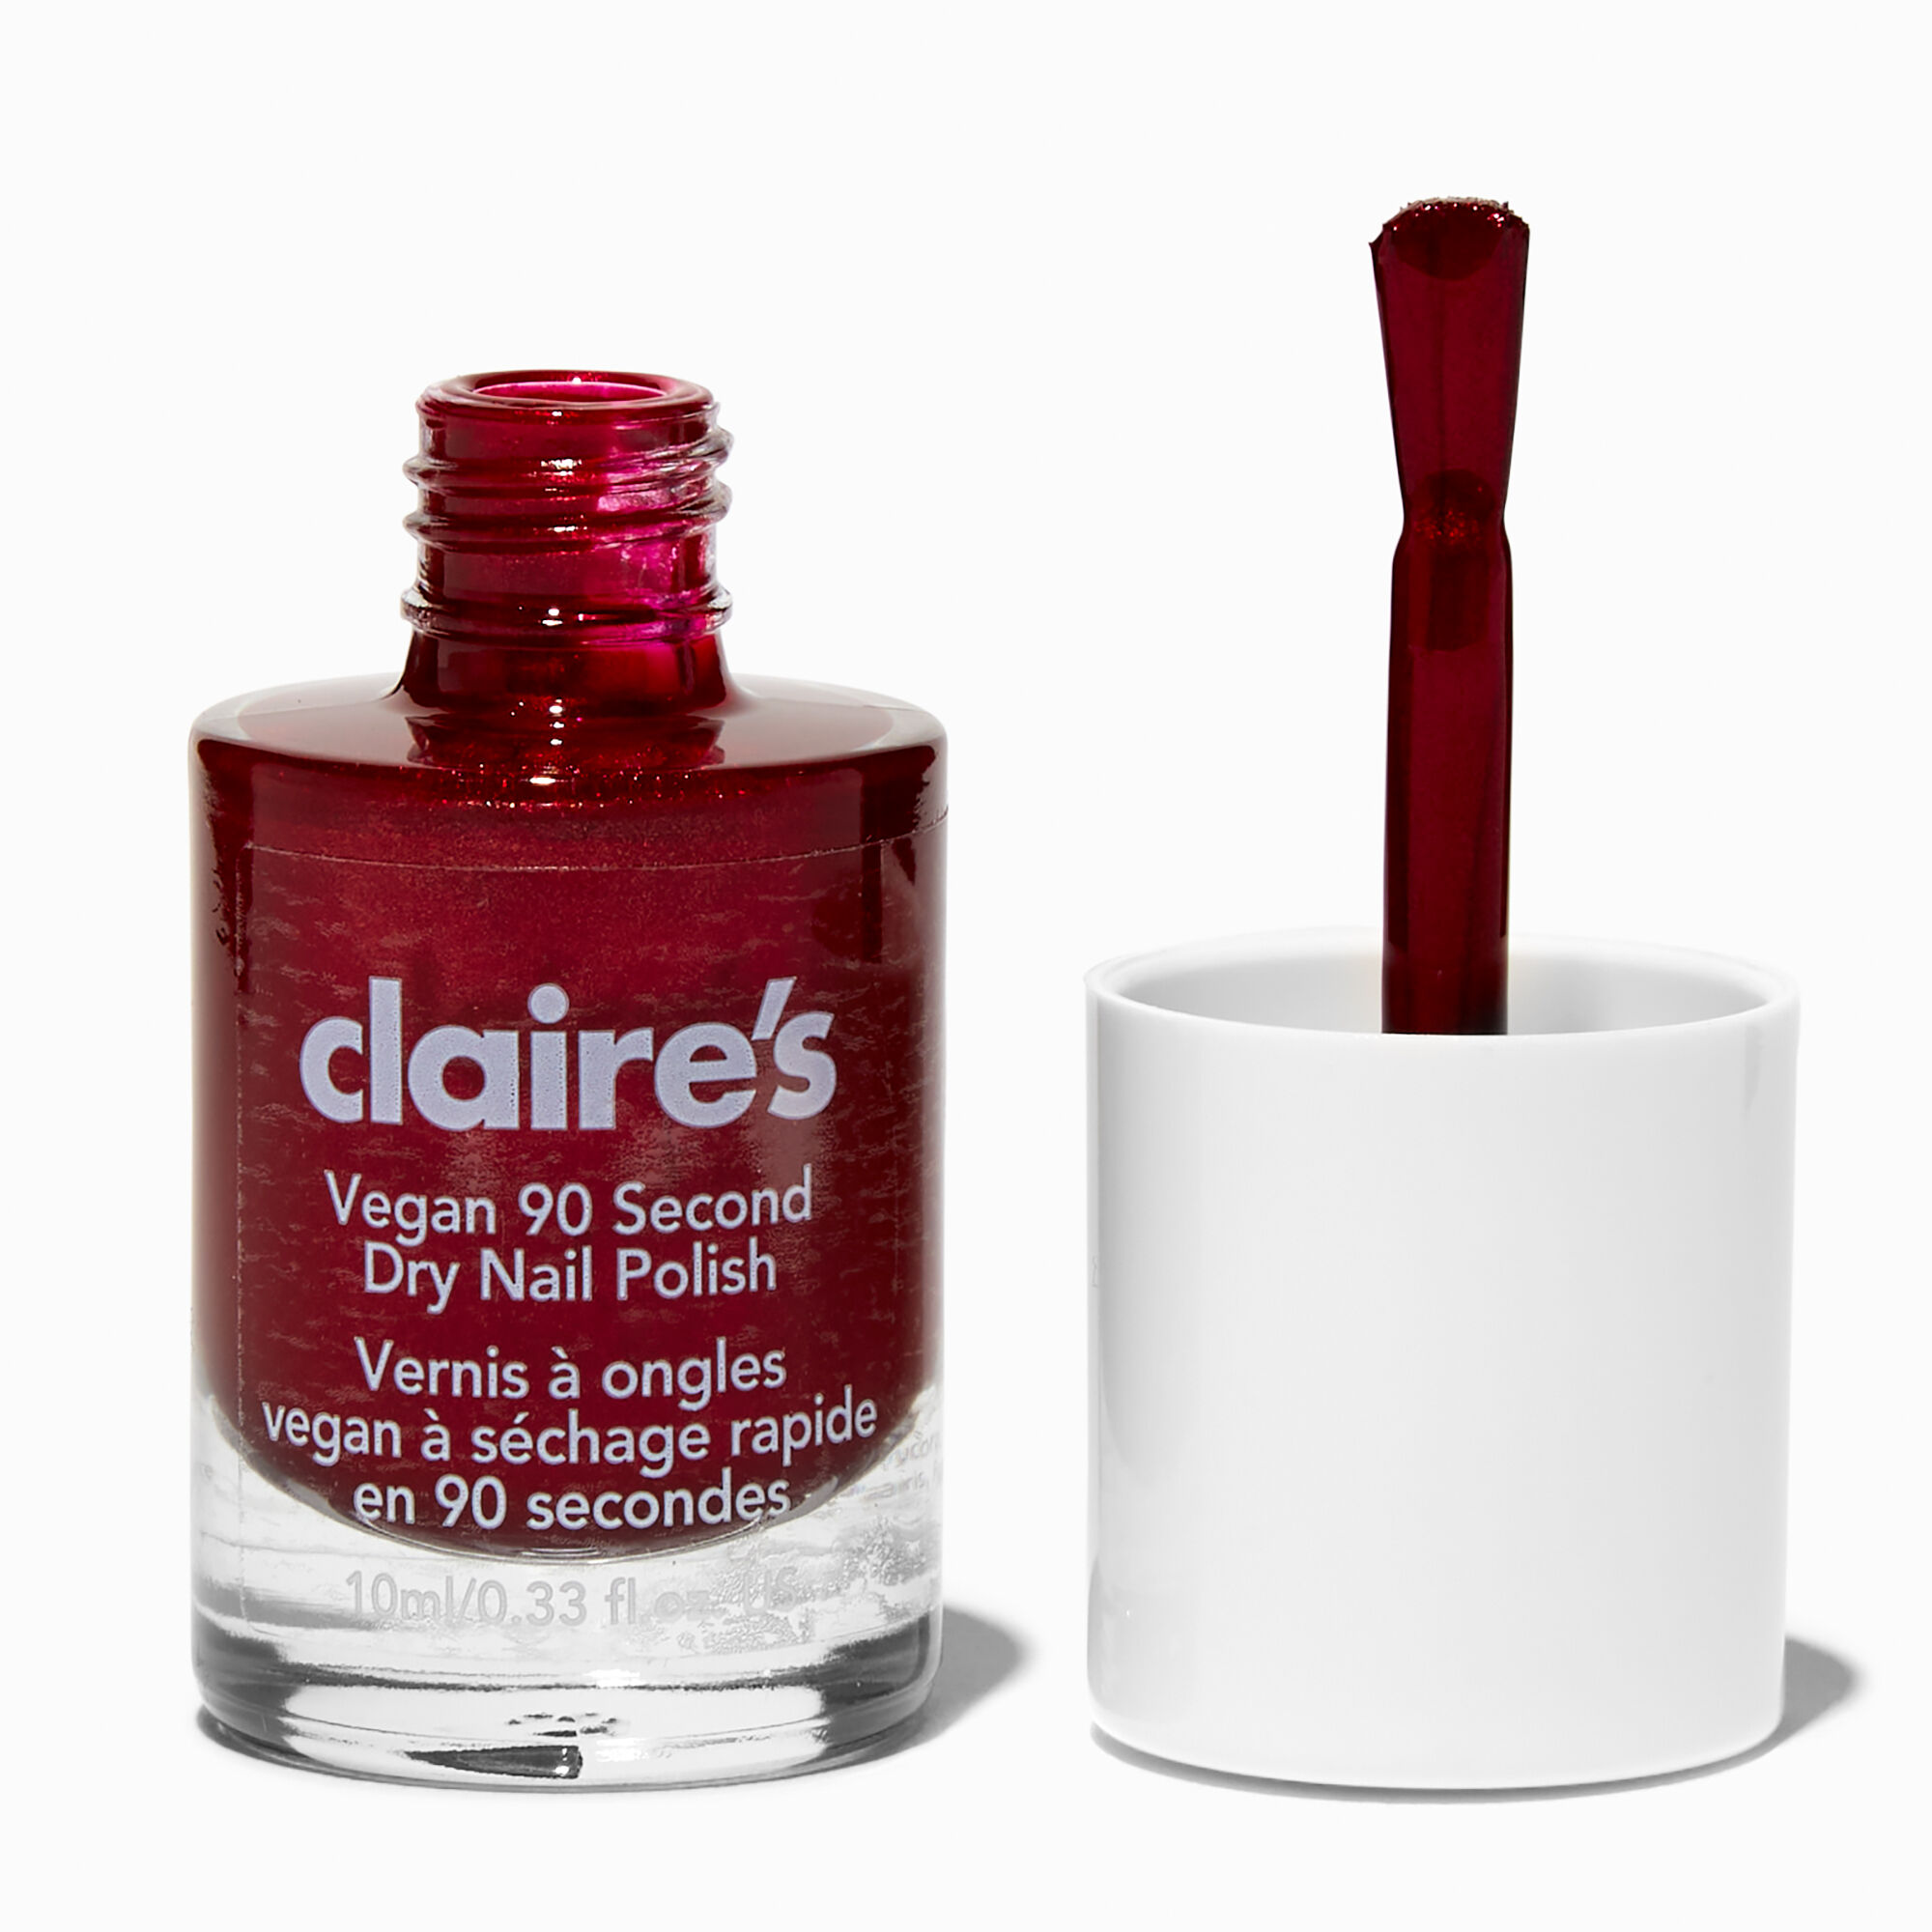 View Claires Vegan 90 Second Dry Nail Polish Love Crush information